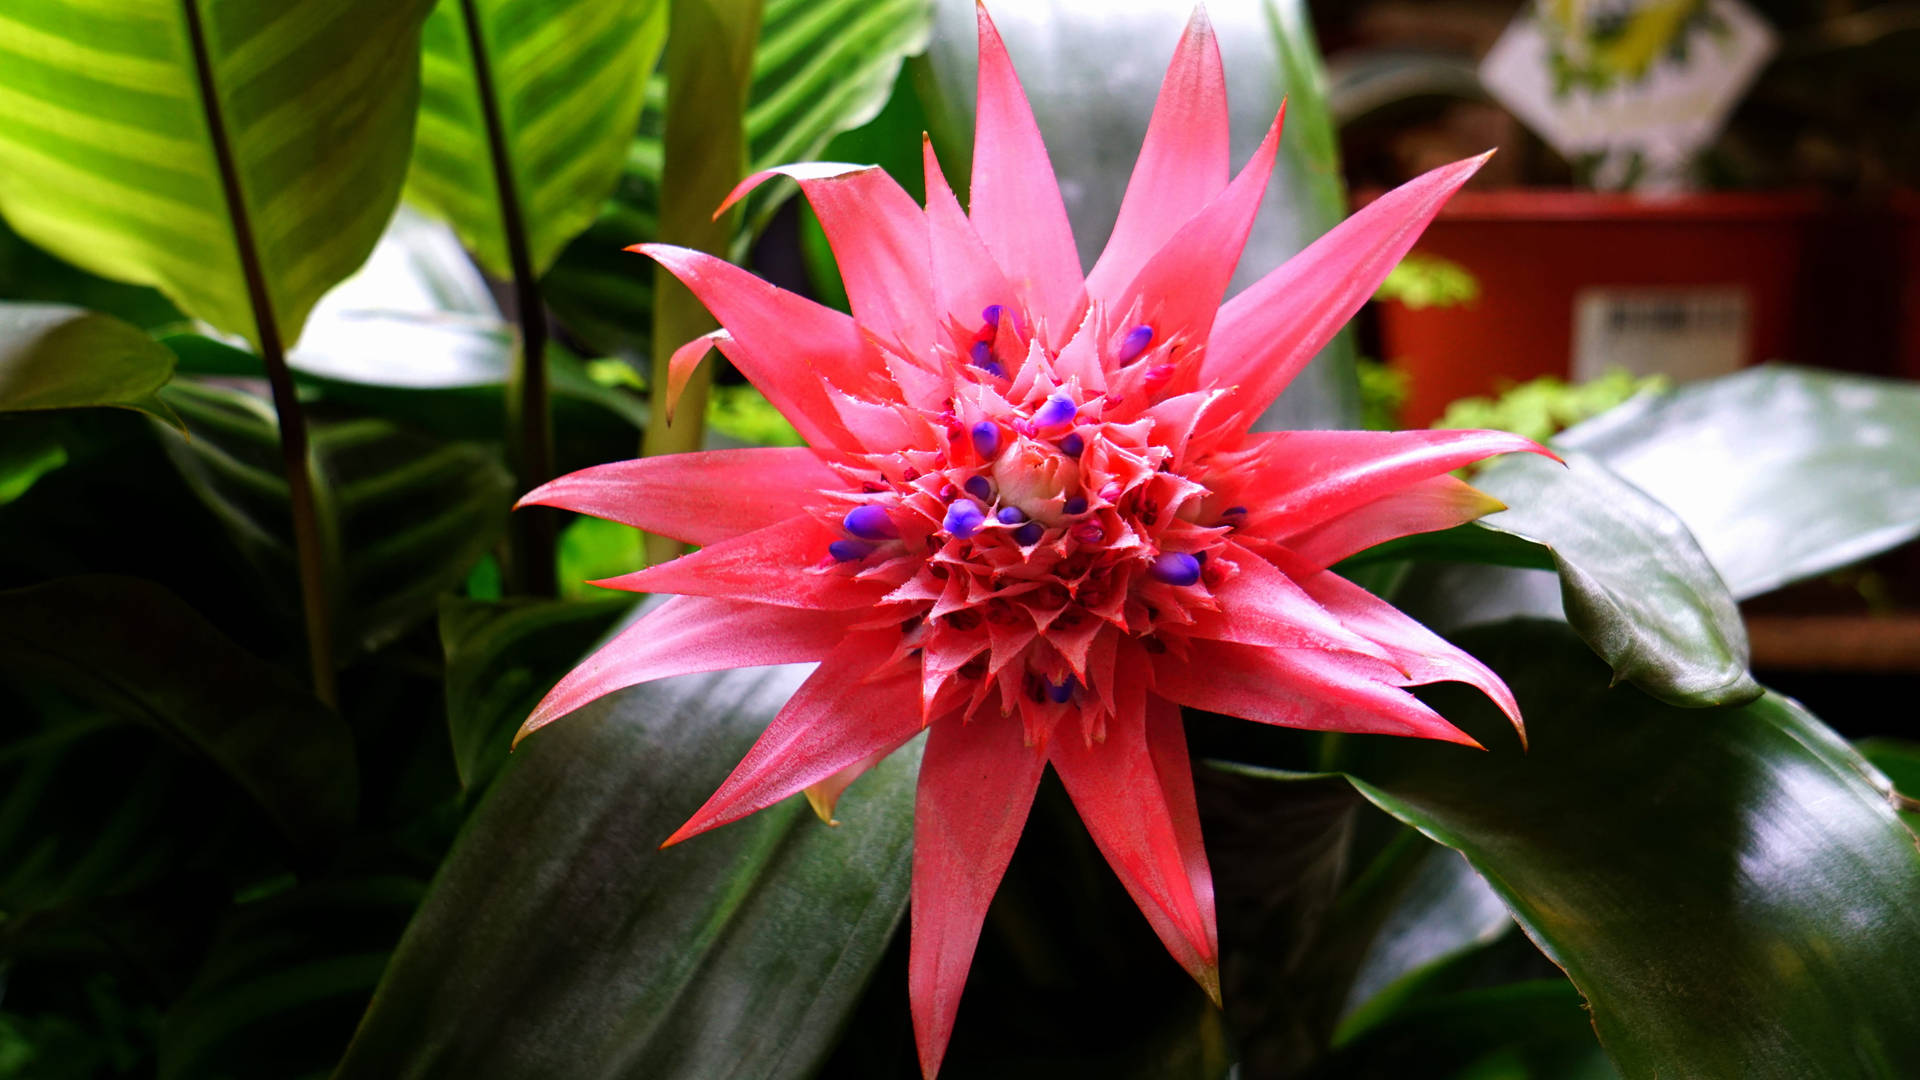 Bromeliad Flower And Green Leaves